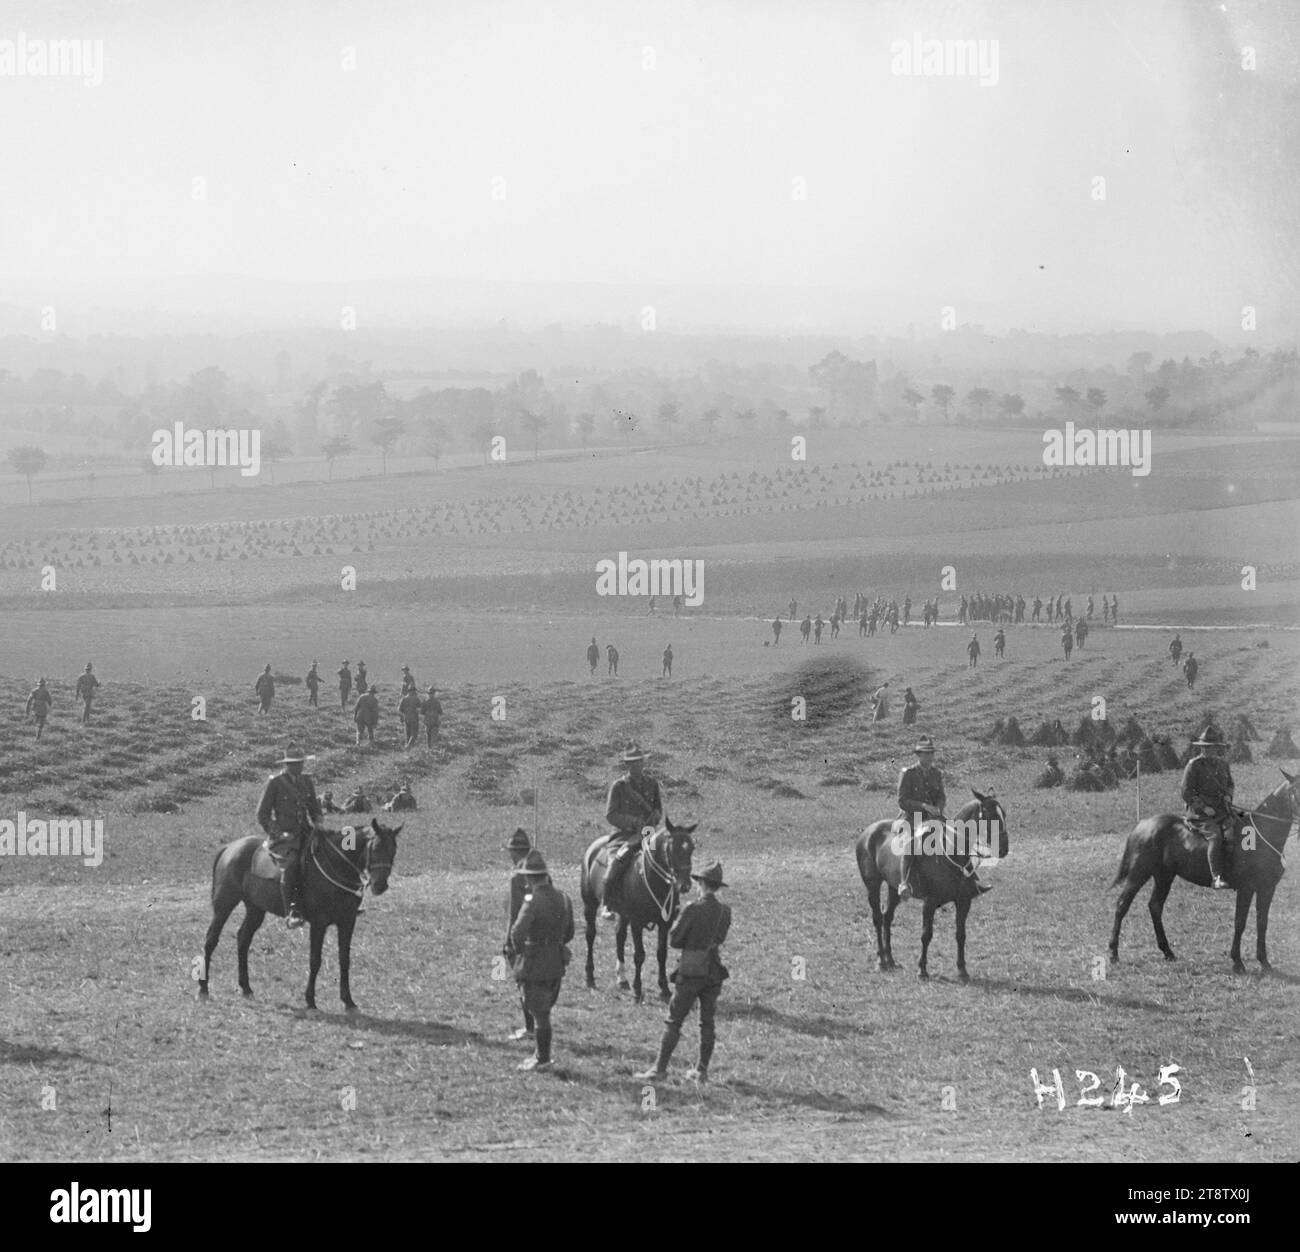 New Zealand troops at the Anzac Horse Show, World War I, A general view of New Zealand competitors being judged at the Anzac Horse Show during World War I. Beyond them soldiers walk in grassy fields. A wood appears in the distance. Photograph taken France 15 September 1917 Stock Photo